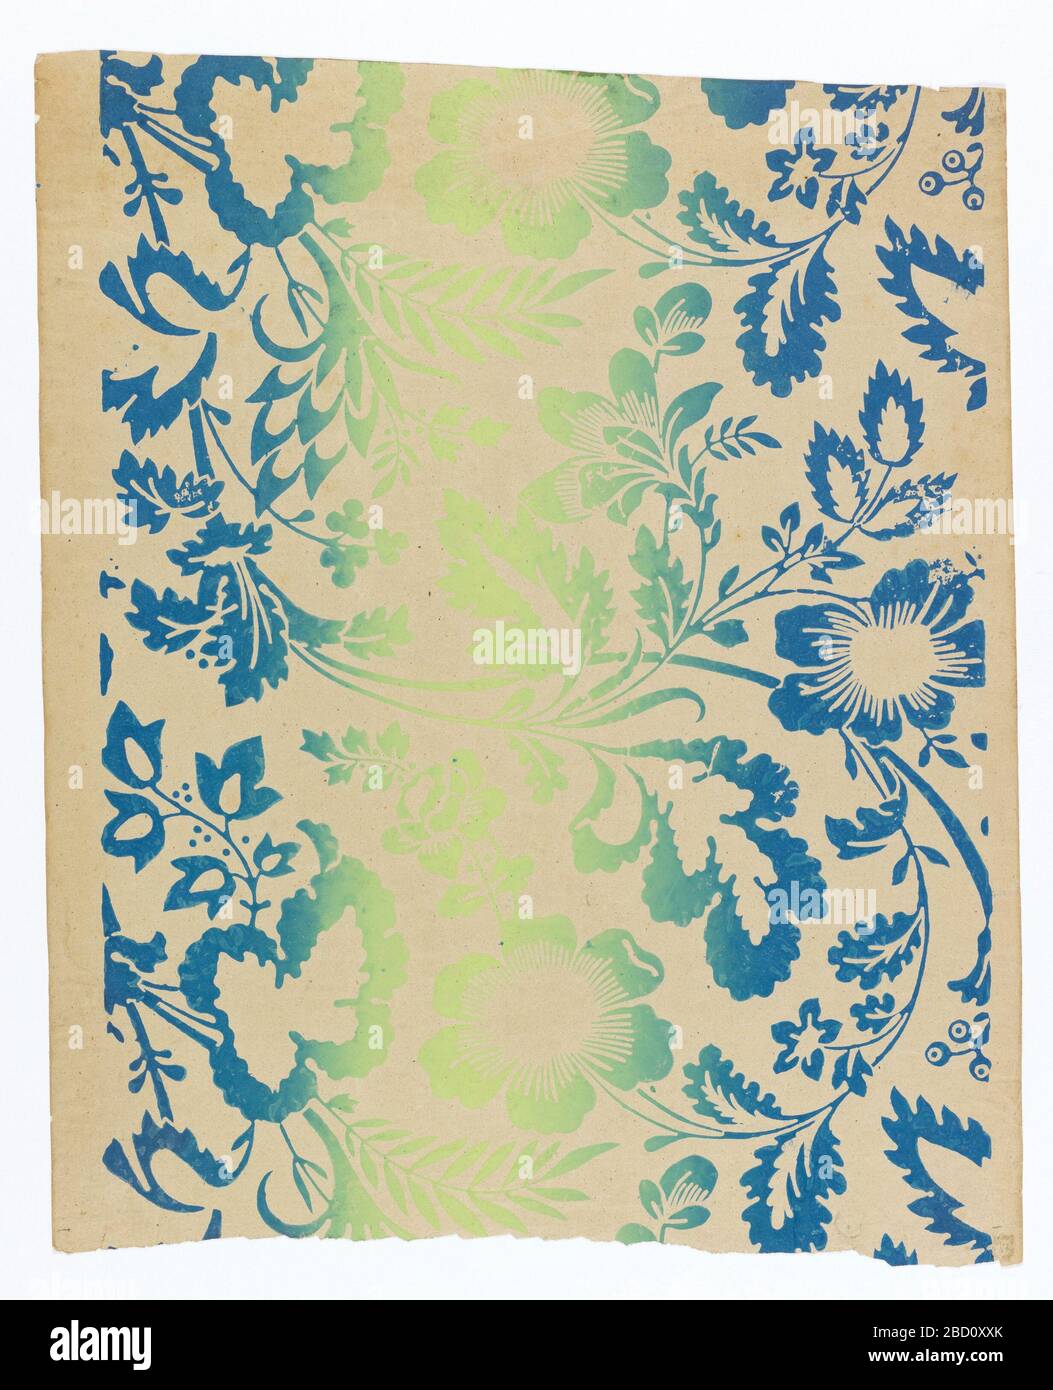 Sidewall. Irise or rainbow paper. Full width of paper giving repeat of large-scale arabesque of flowers and foliage in graded color, ranging from blue along edges to green down center. Sidewall Stock Photo